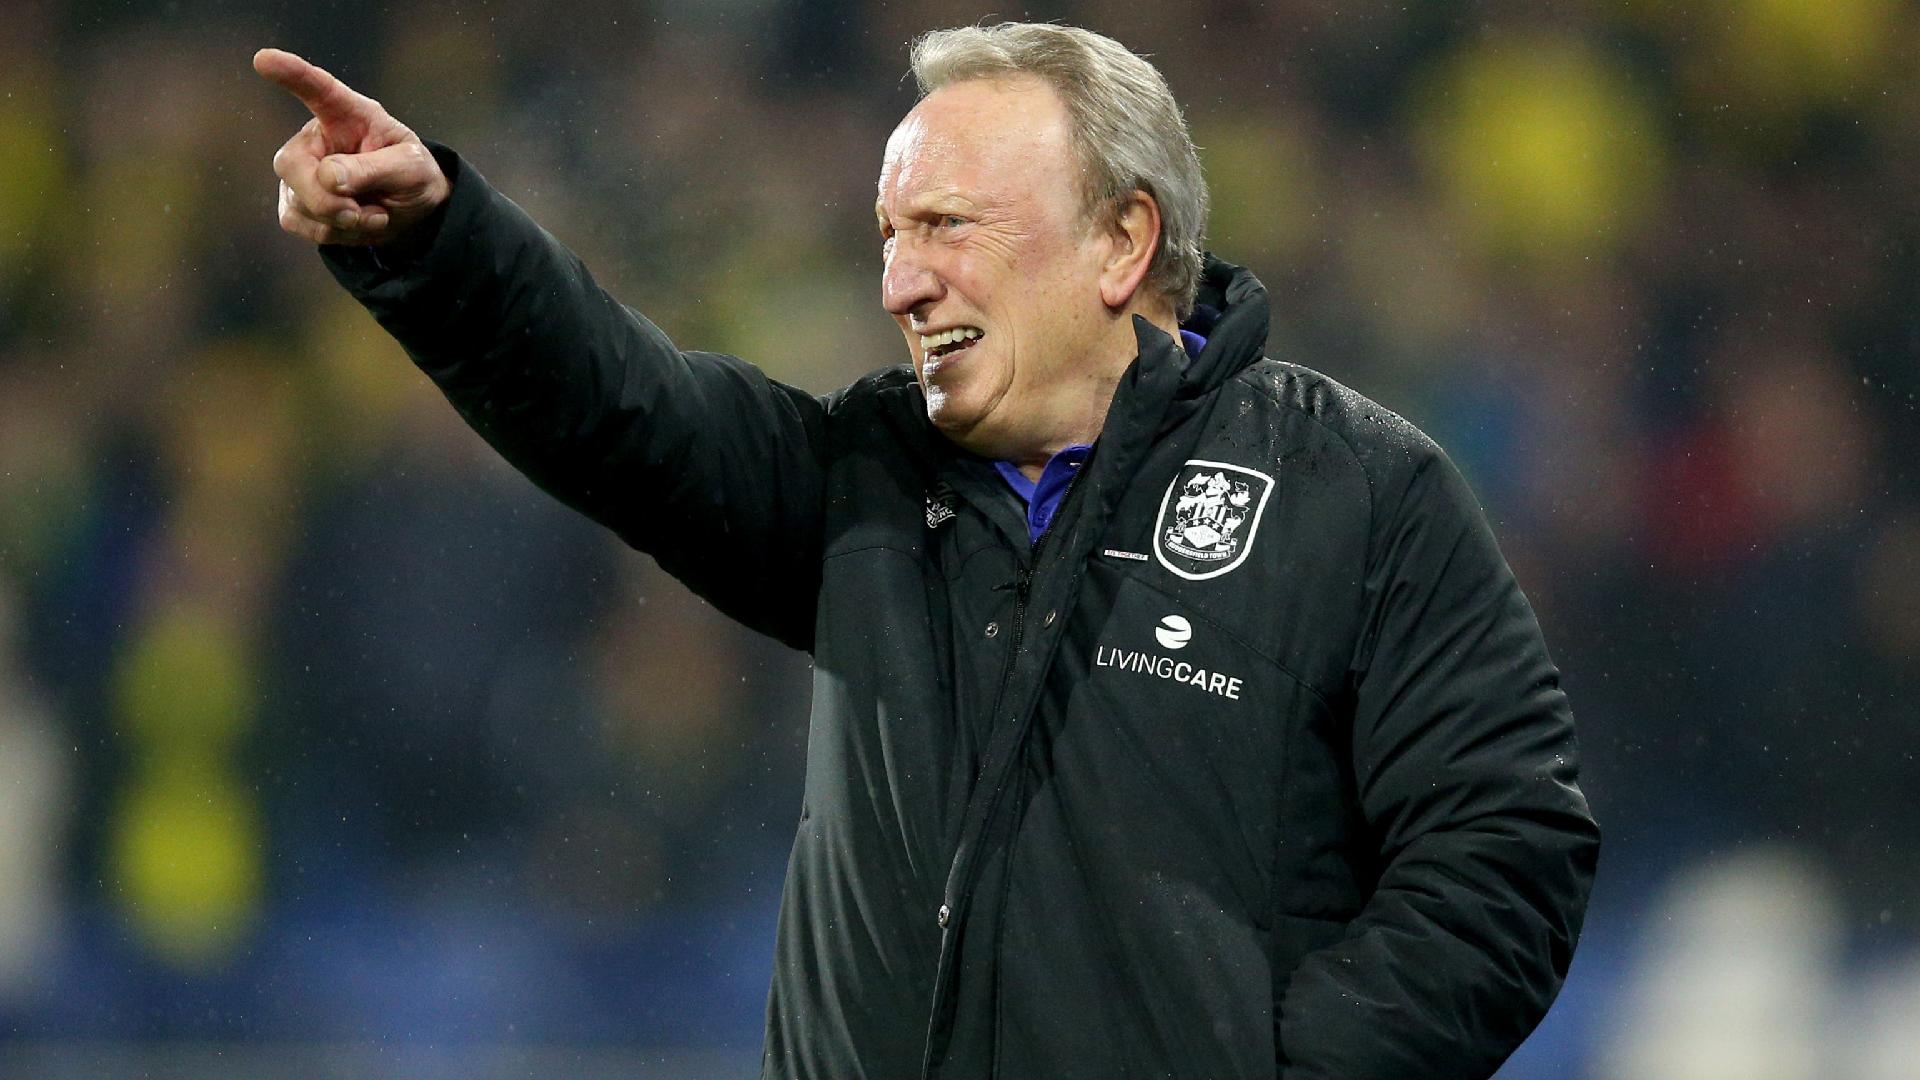 Aberdeen bring in veteran manager Neil Warnock to replace Barry Robson